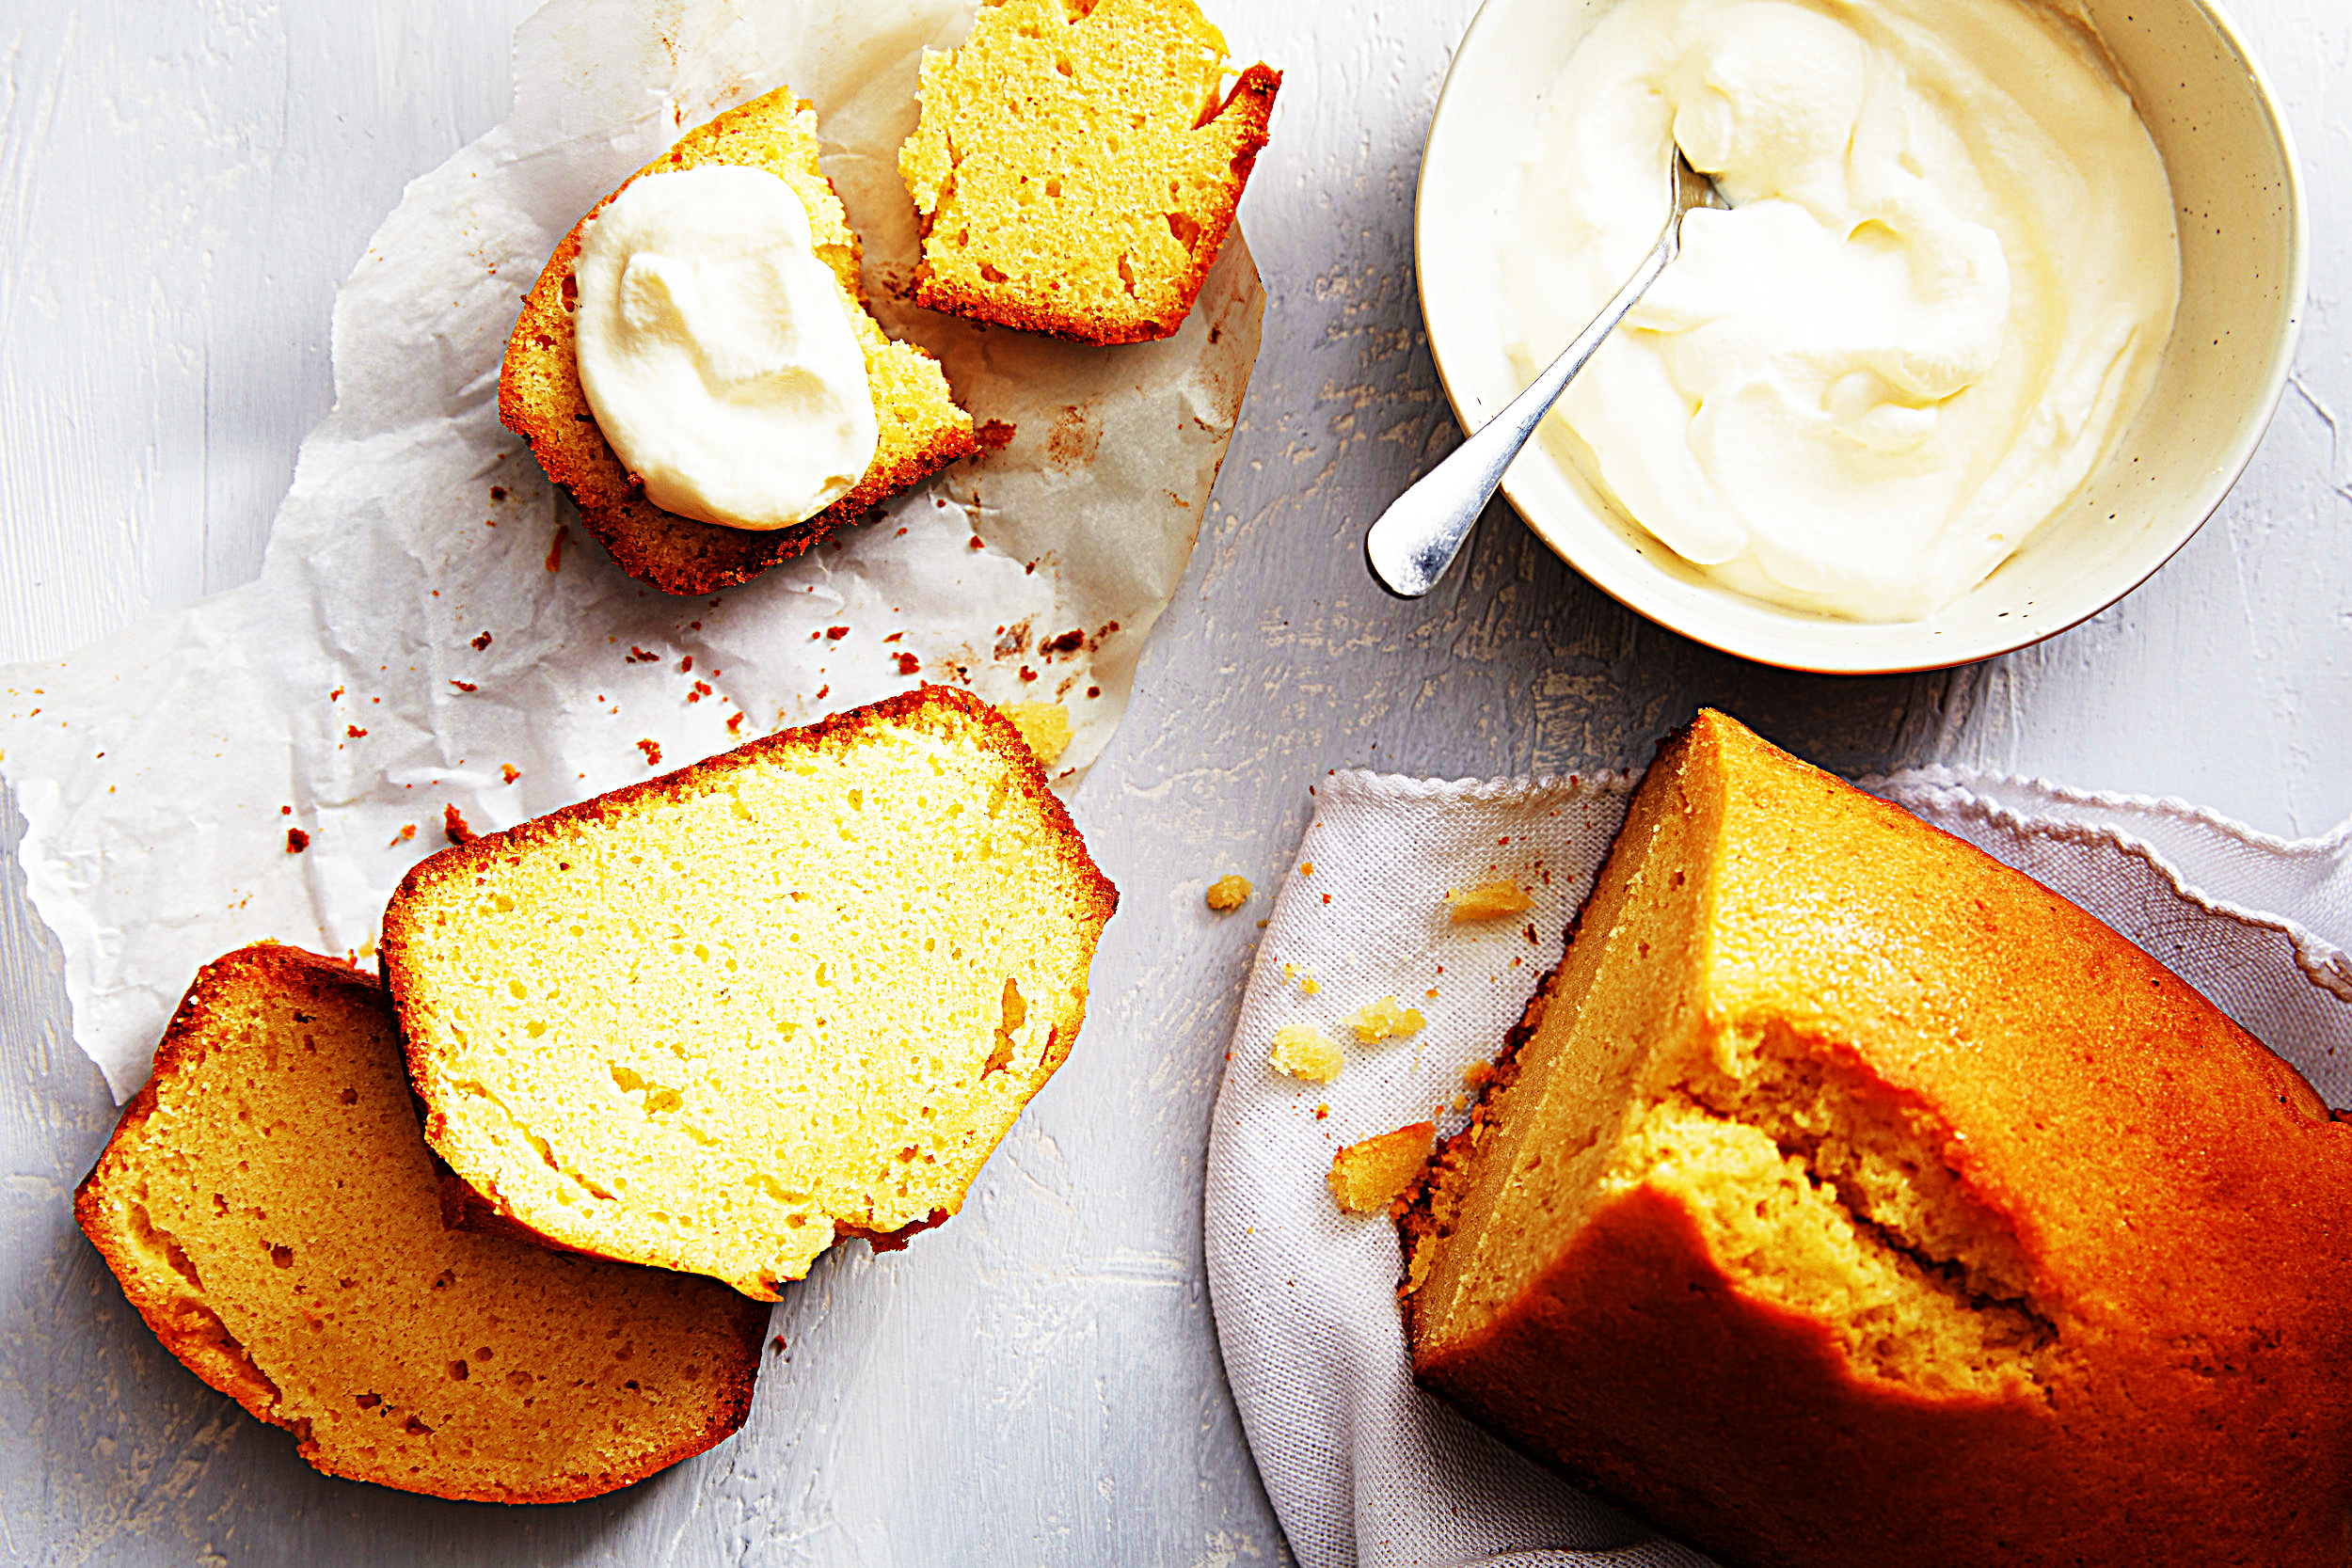 Stupid-Easy Recipe for 5-Ingredient Pound Cake (#1 Top-Rated)